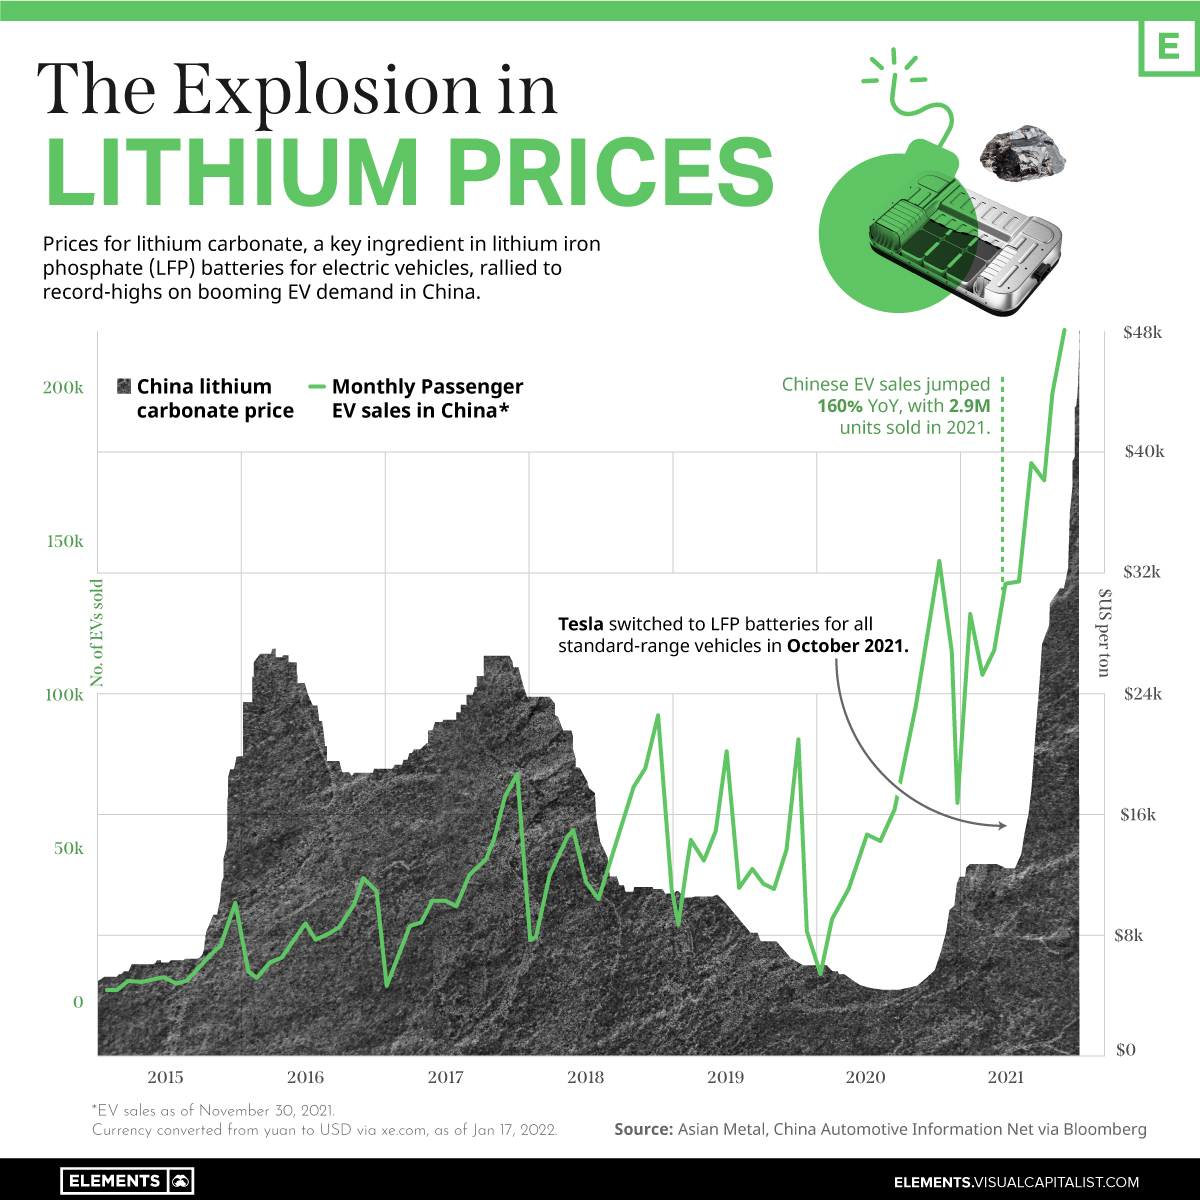 The Explosion in Lithium Prices